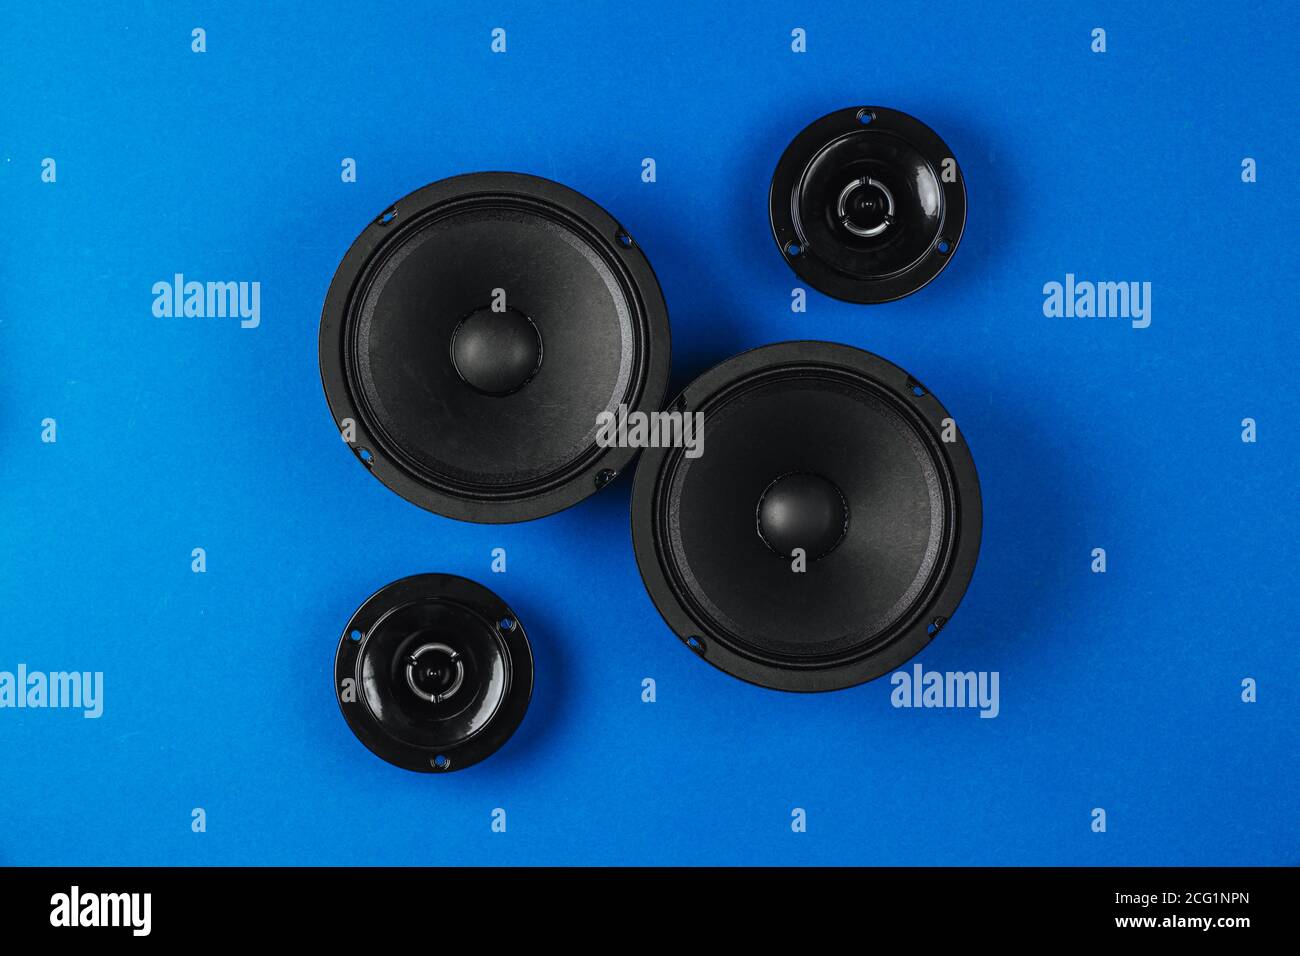 Car audio, car speakers, on a blue background. Copy space Stock Photo